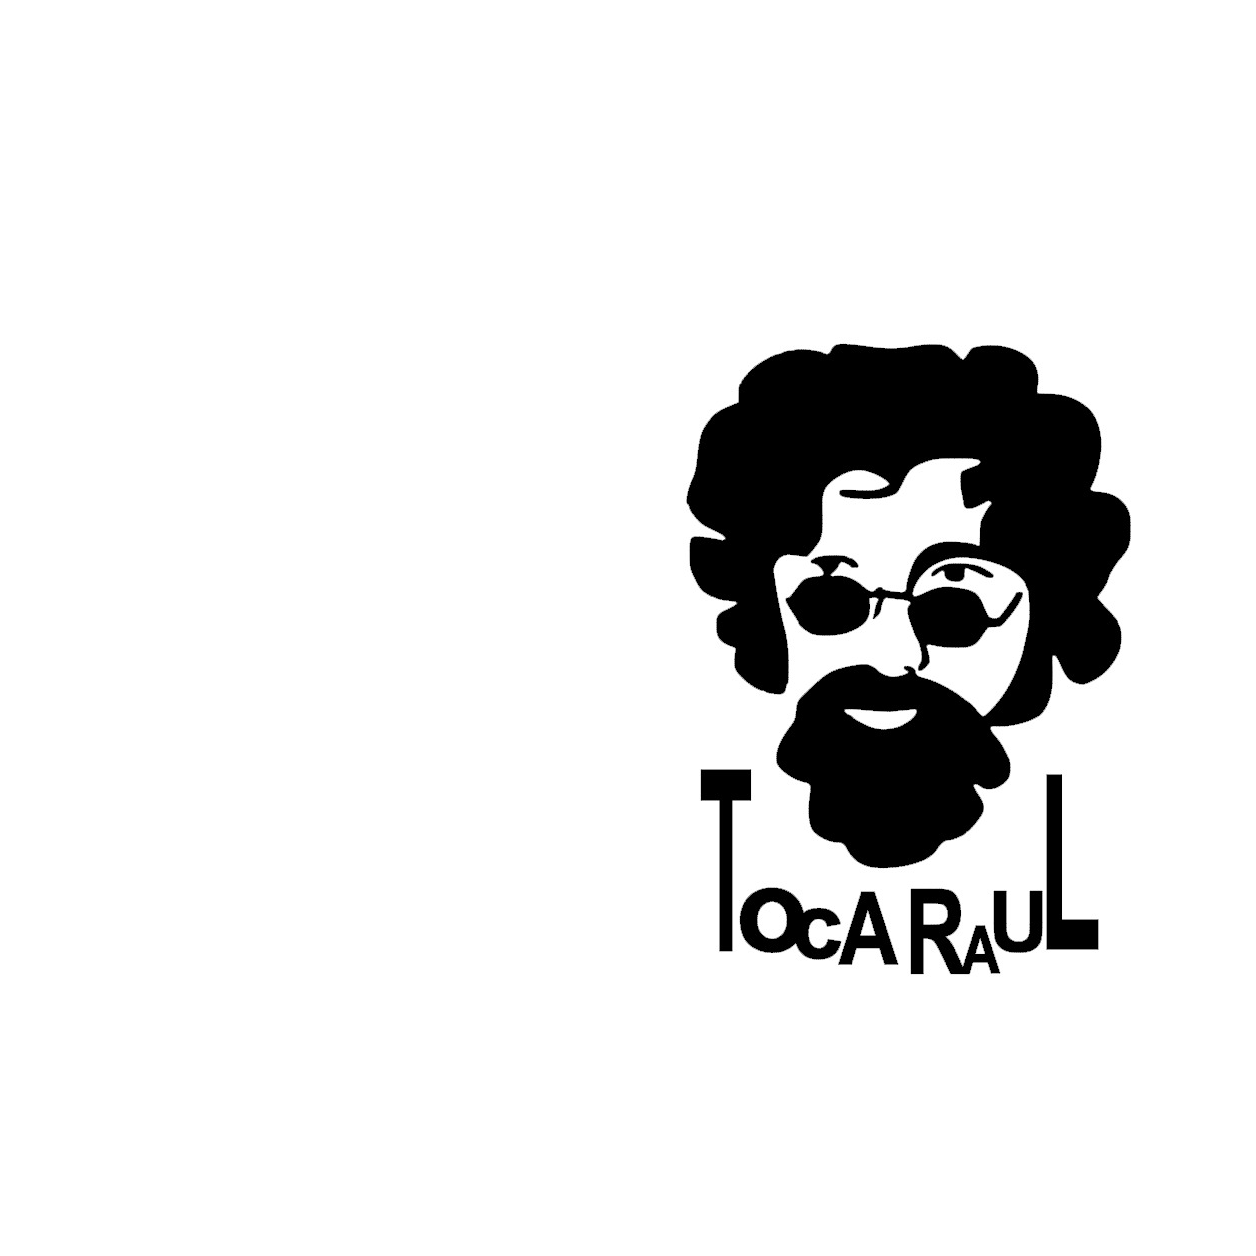 TocaRaul